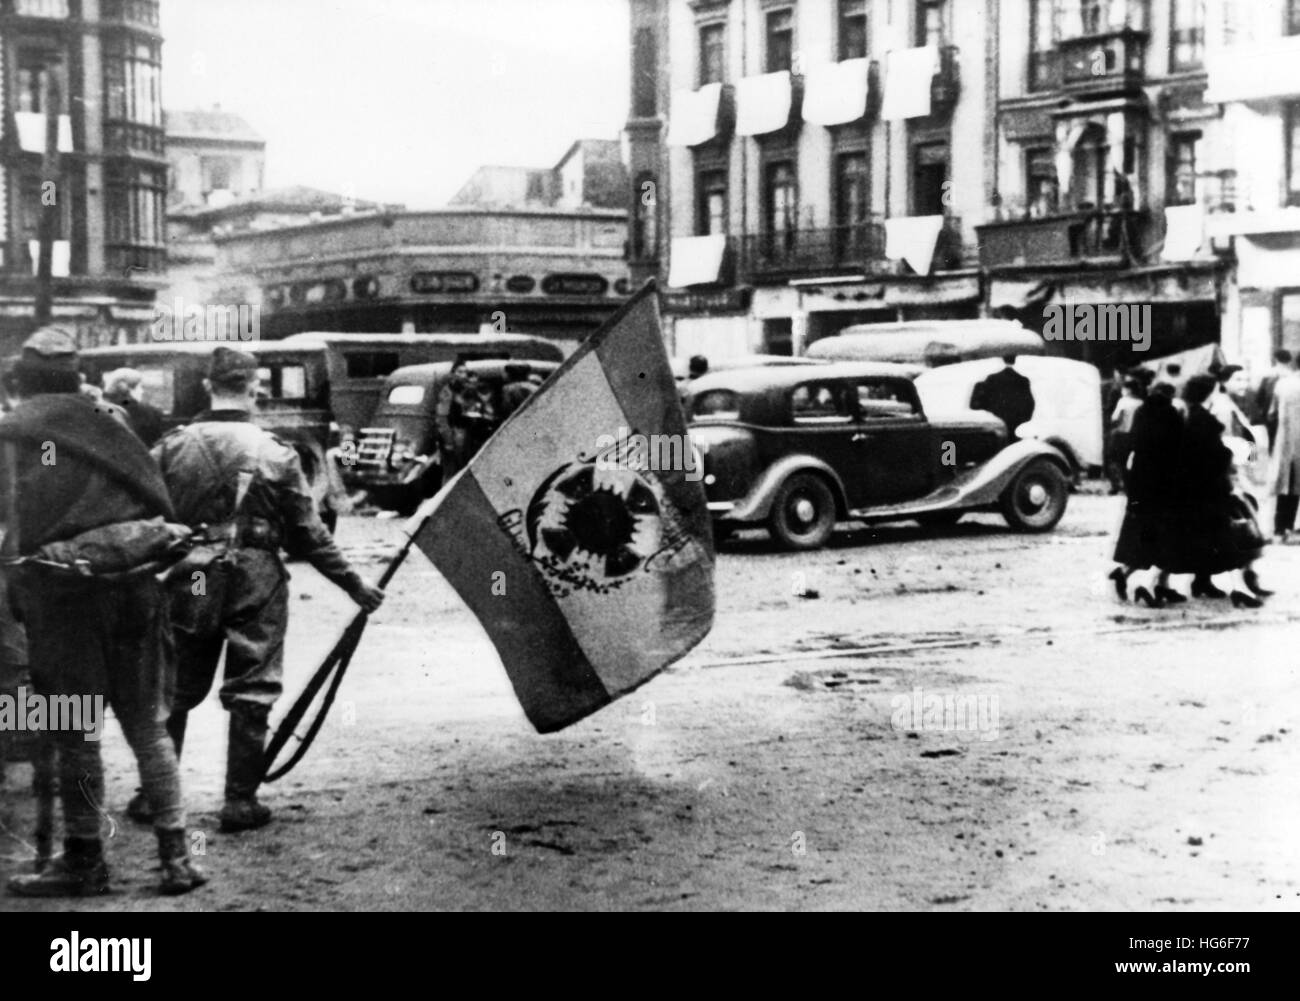 The Nazi propaganda picture shows how Francos troops occupy the city Gijón, Spain, November 1937. White cloths hang out of windows in the background symbolizing the surrender. Fotoarchiv für Zeitgeschichtee- NO WIRE SERVICE - | usage worldwide Stock Photo